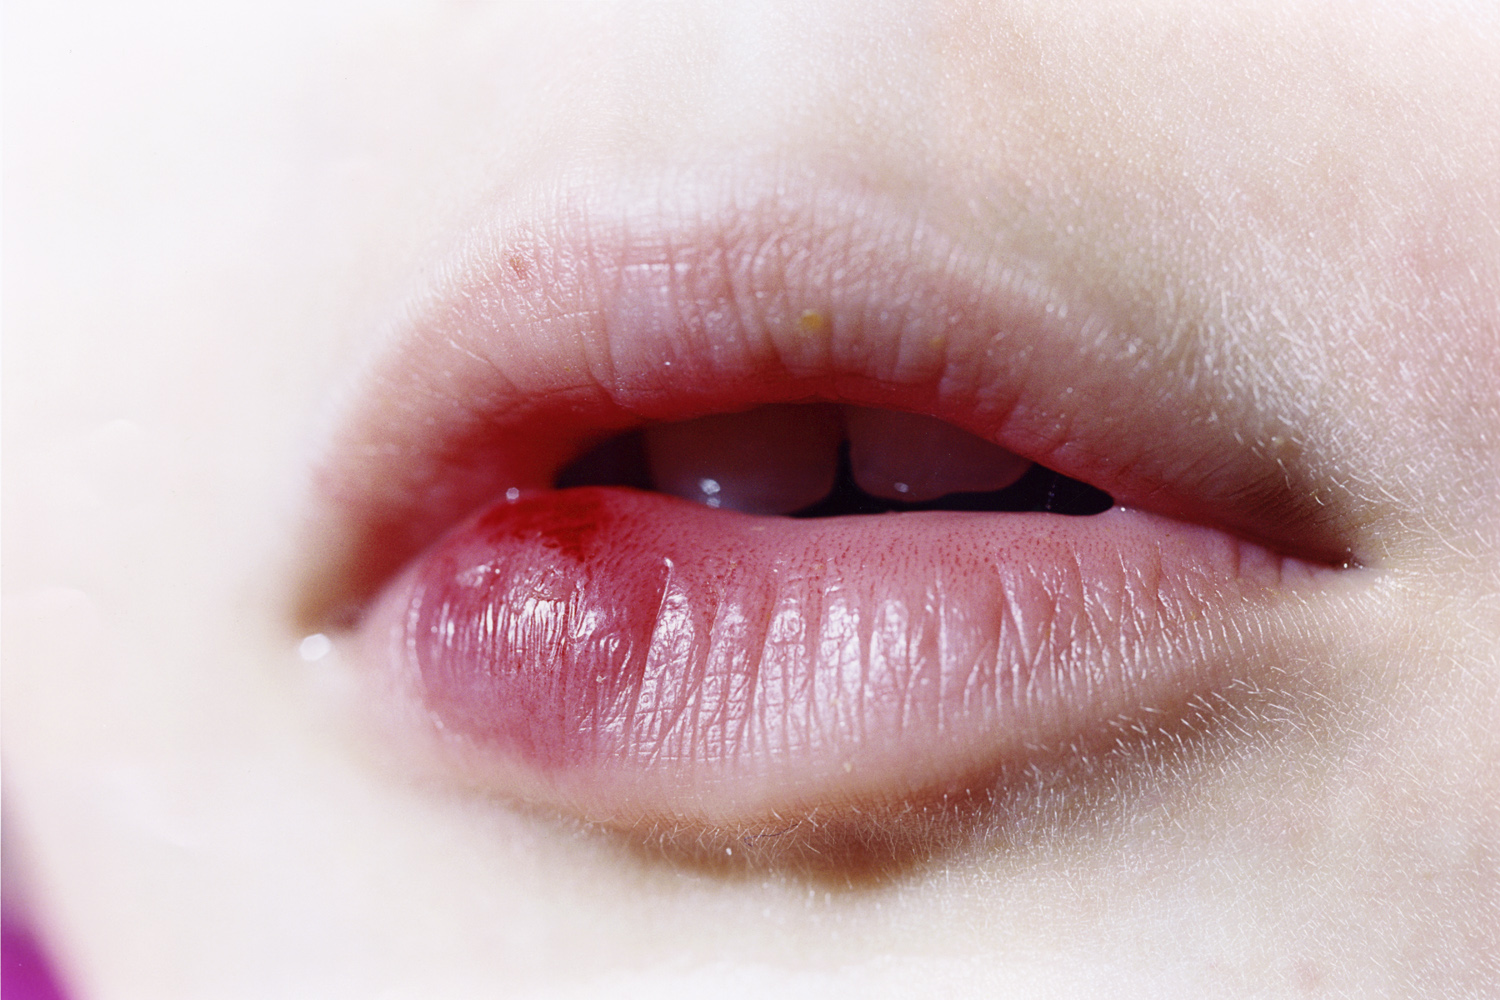 Bruised mouth, 2007